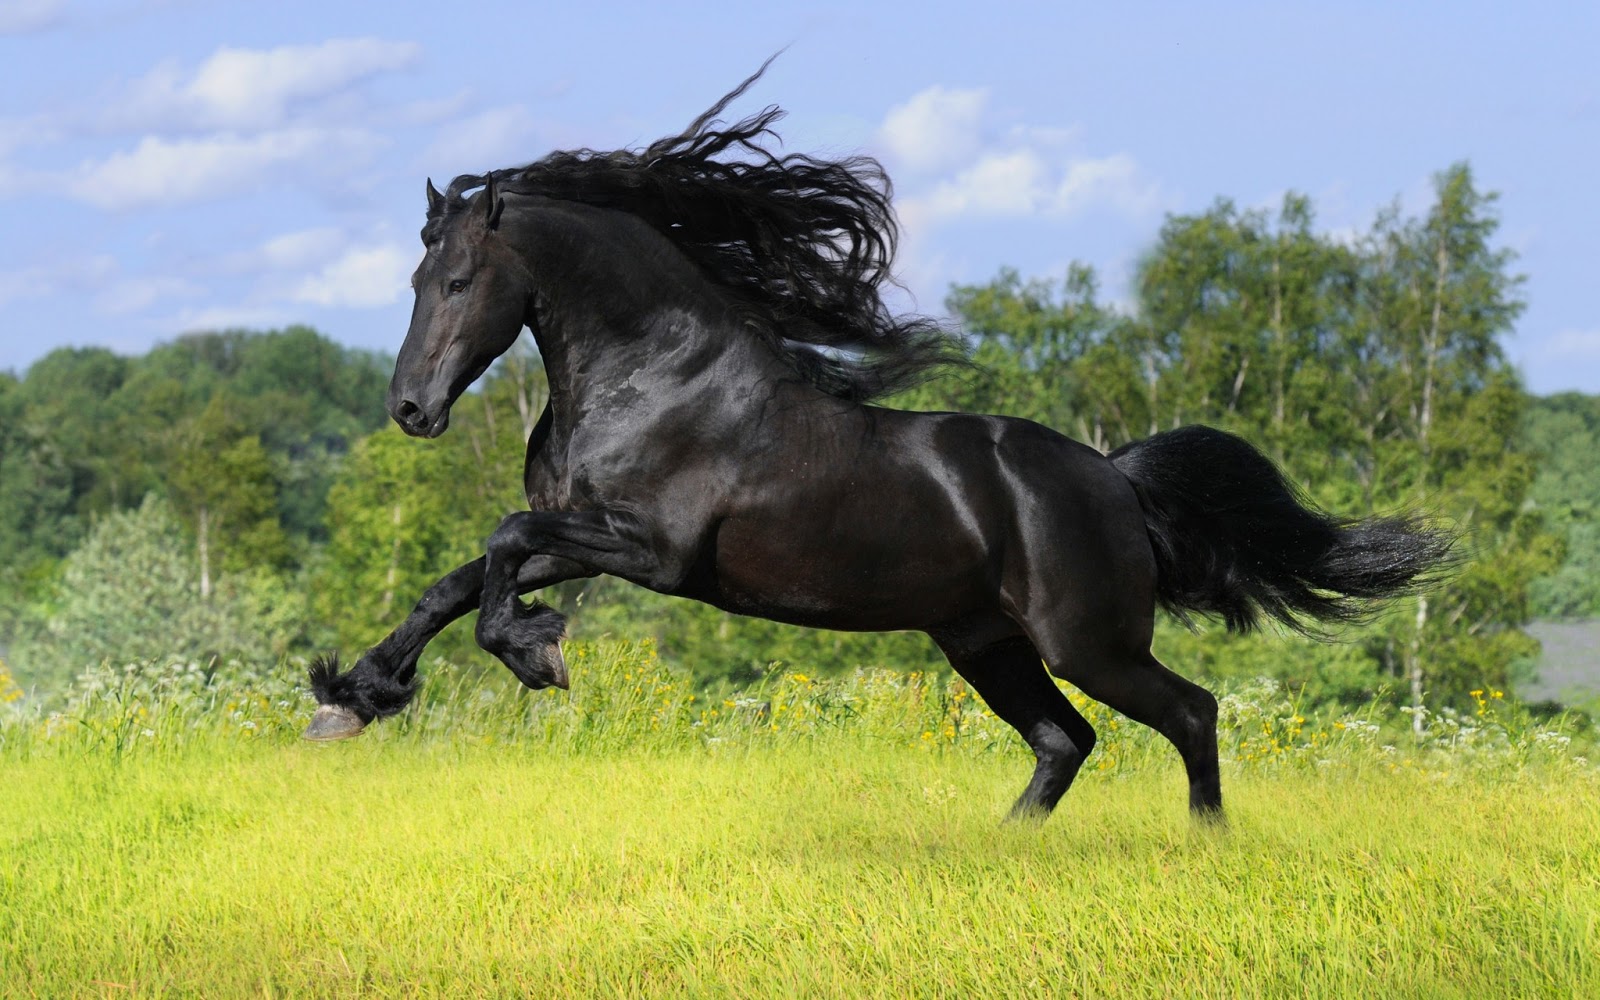 Wild Horses HD Wallpaper Check Out The Cool Image